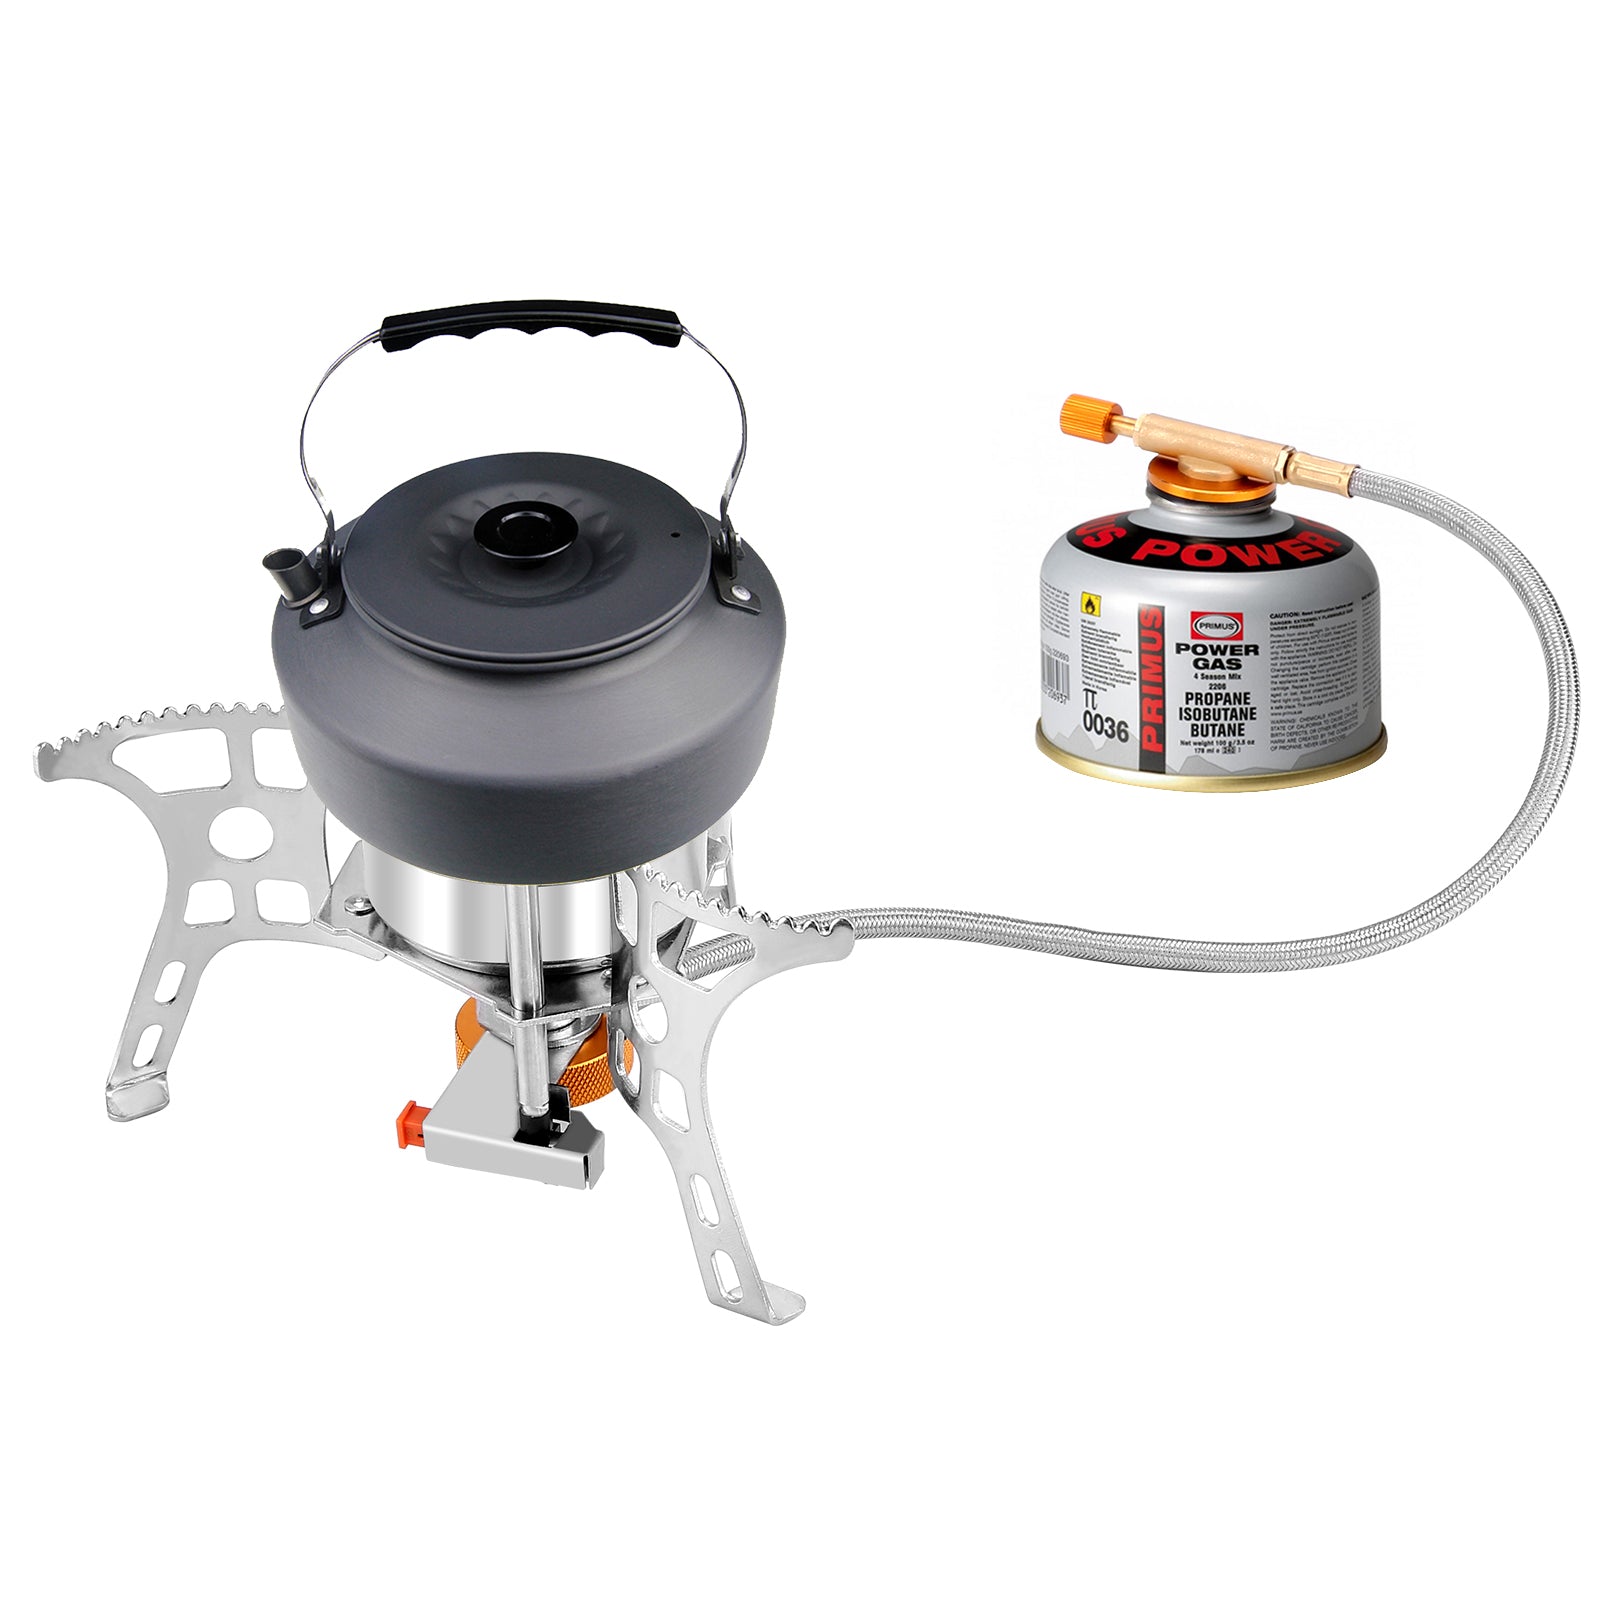 WADEO Portable Backpacking Stove, 3900W Windproof Camping Gas Stove with Piezo Ignition, 1LB Propane Tank Adapter, Butane Adapter for Outdoor Camping, Hiking and Picnic